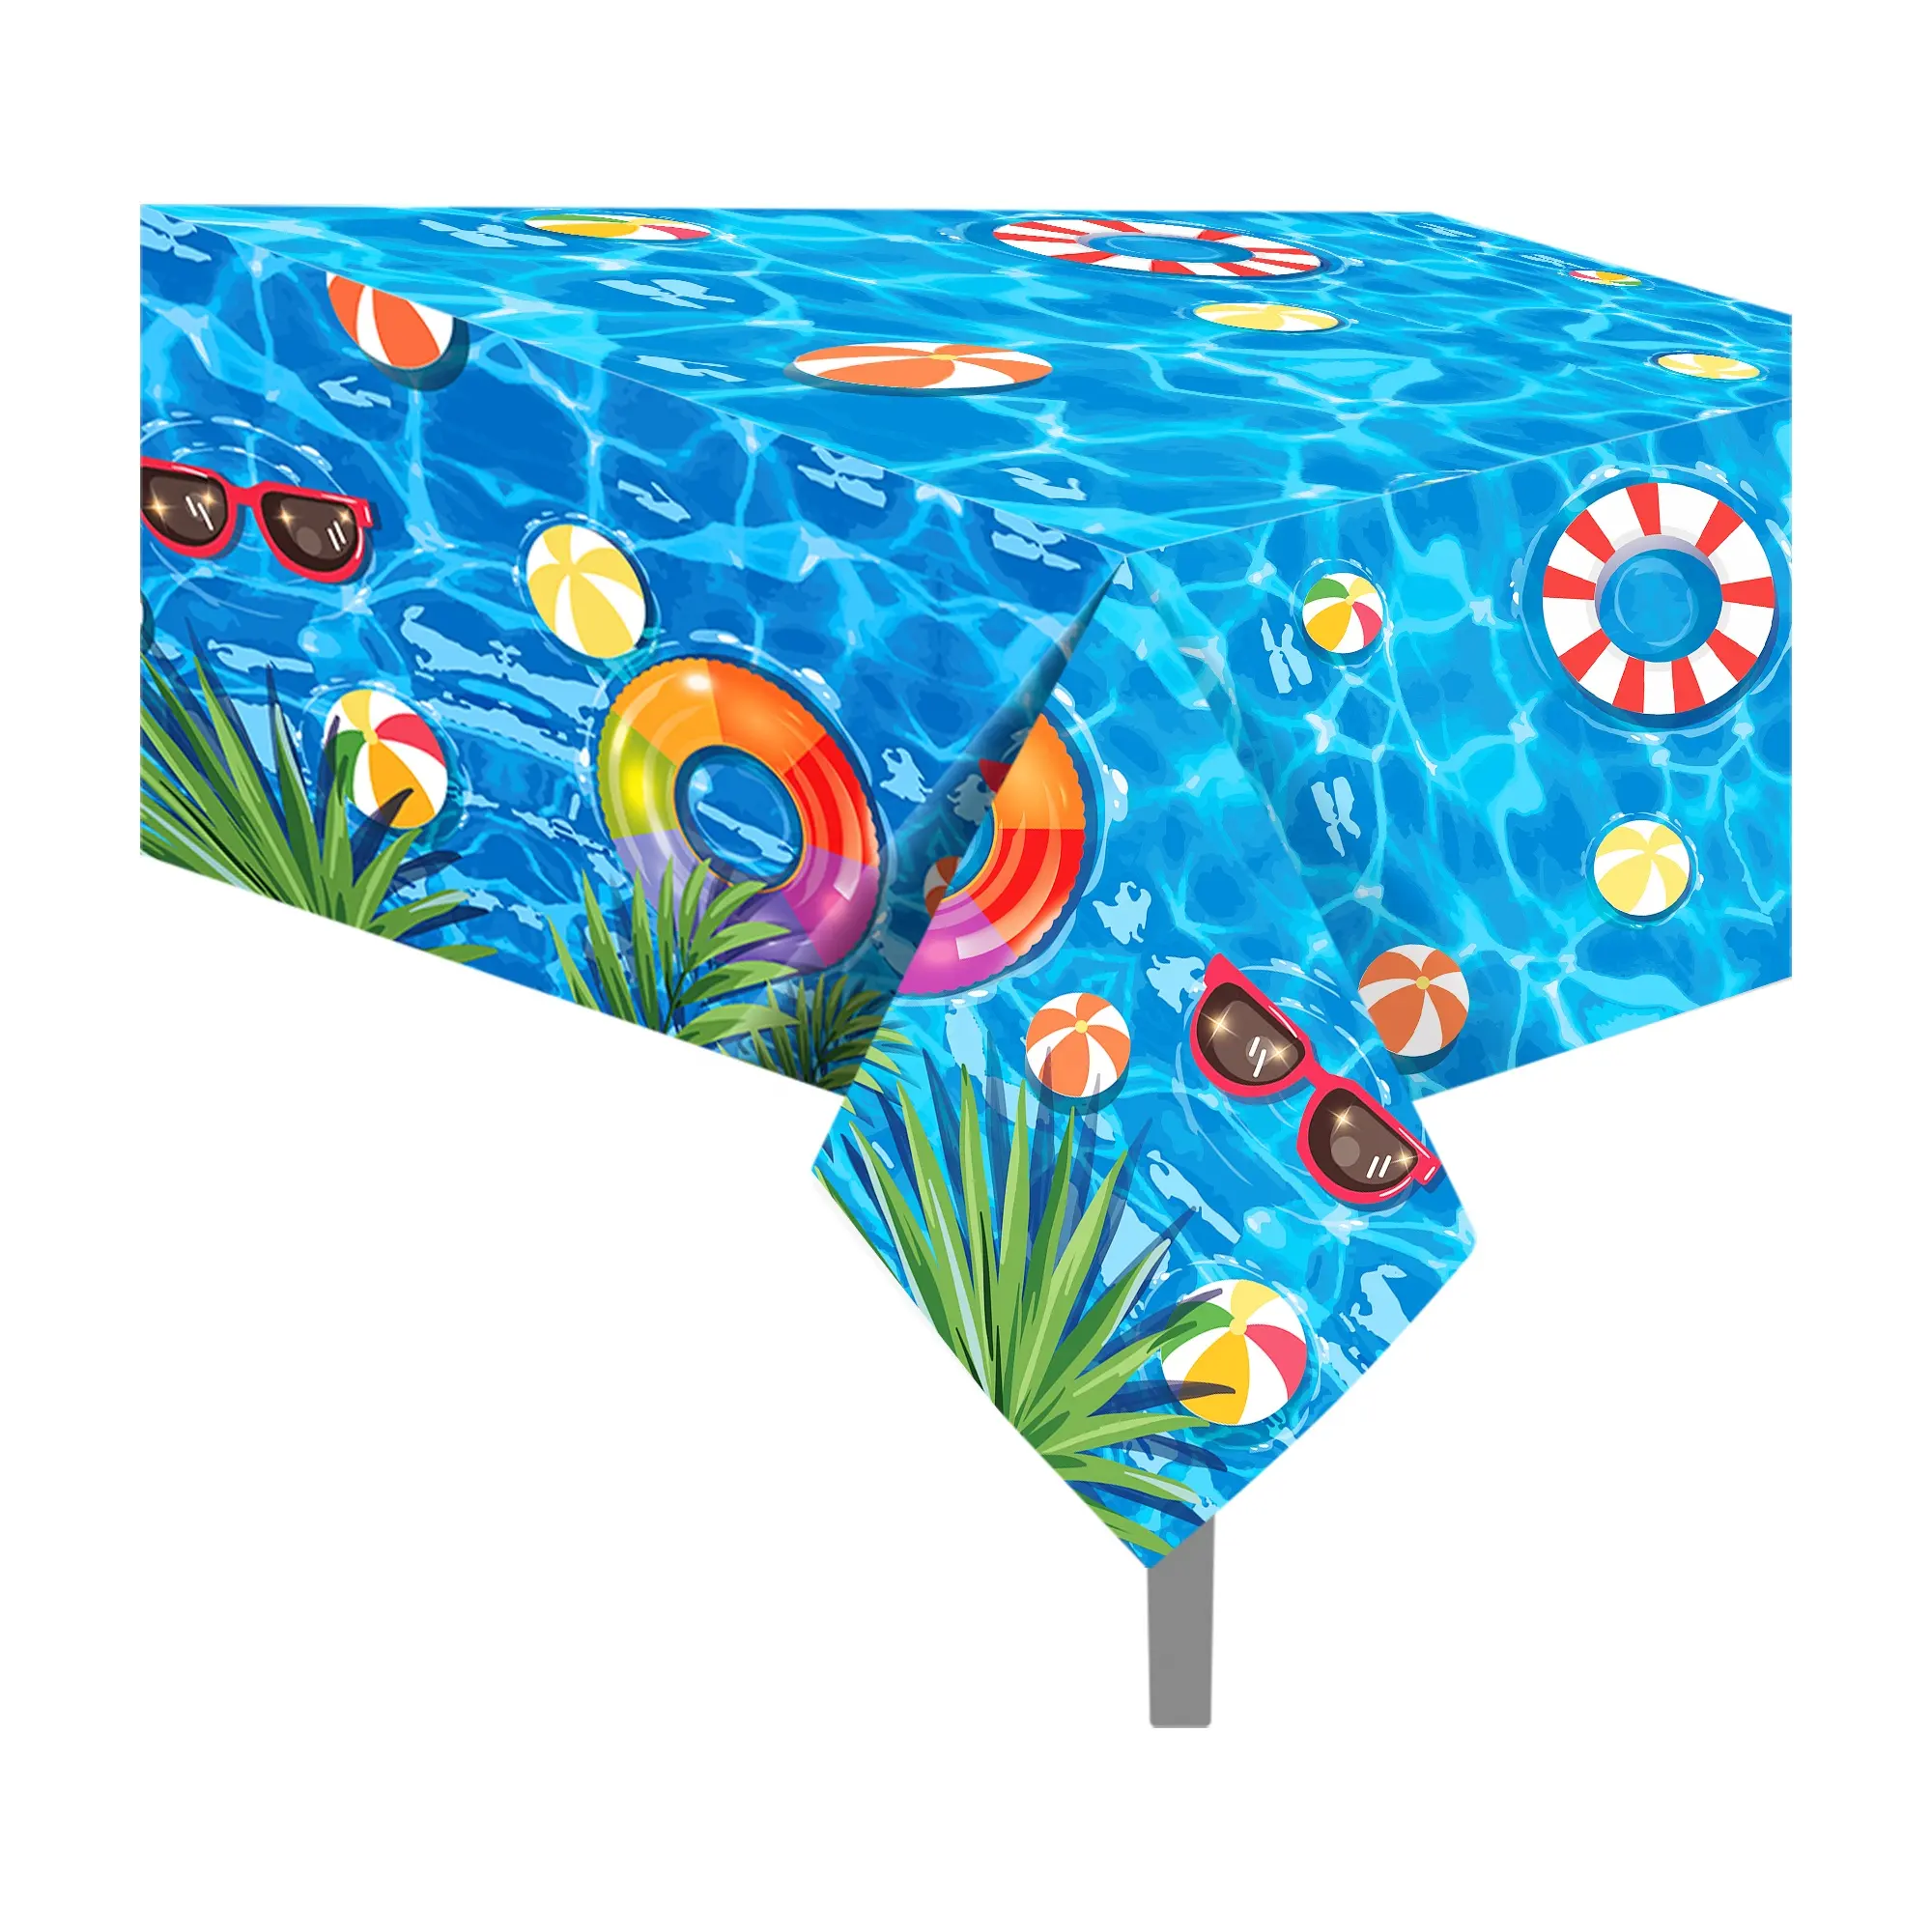 Huancai swimming pool PE table cover birthday Hawaii party decorations 130x220cm plastic table cloth for beach party supplies